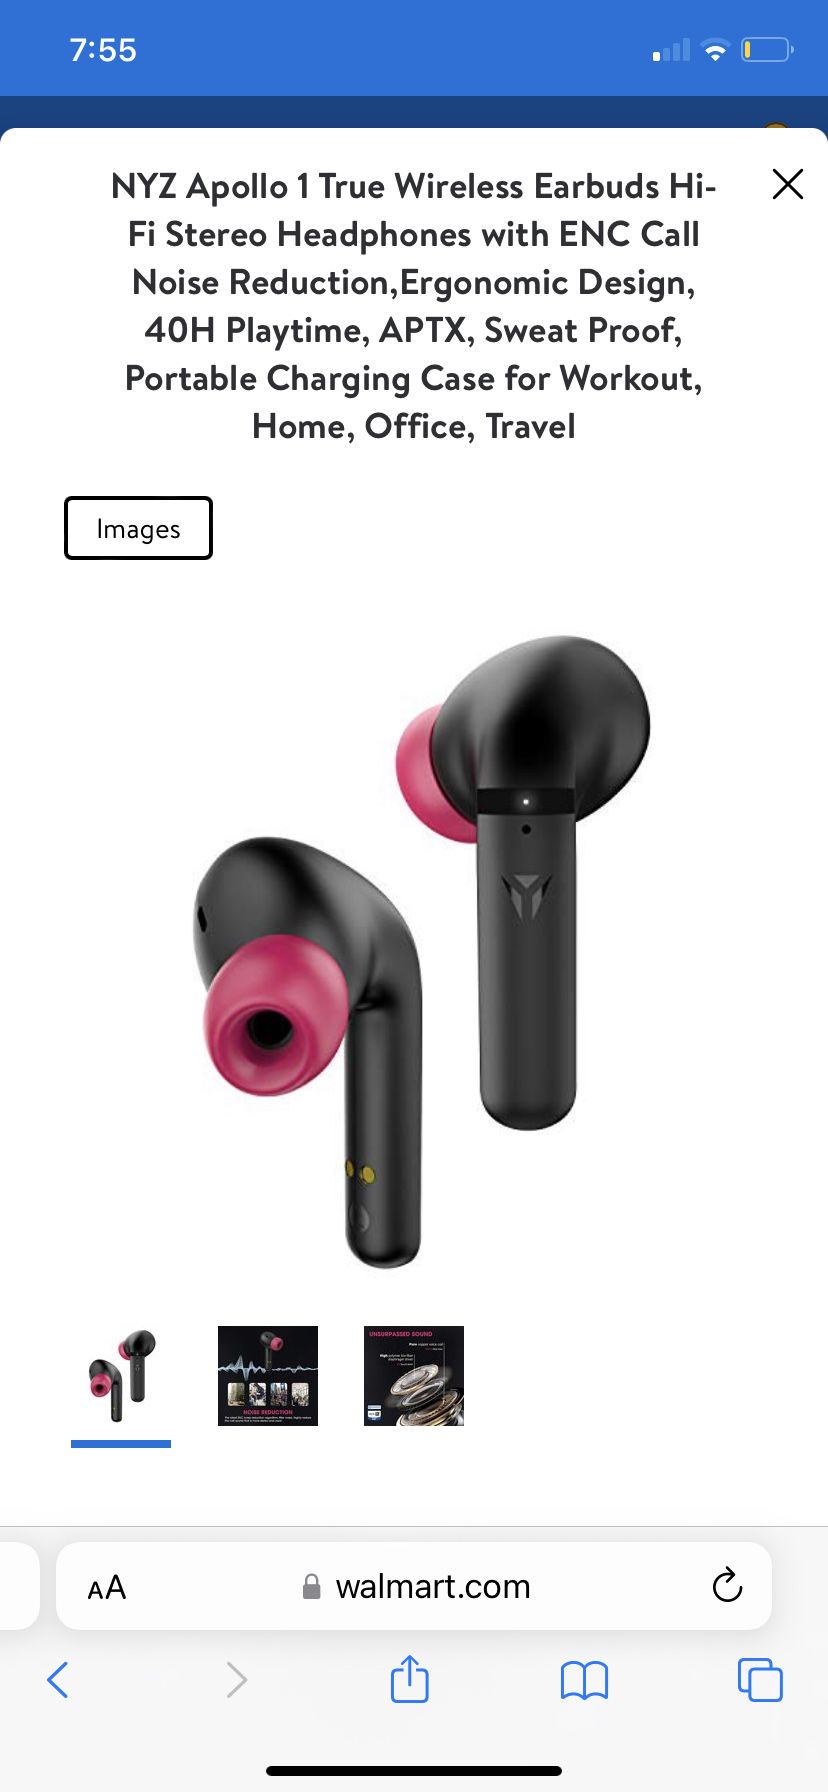 Nyz Apollo 1 True Wireless Earbuds Hi-Fi Stereo Headphones with Enc Call Noise Reduction,Ergonomic Design, 40H Playtime, ...